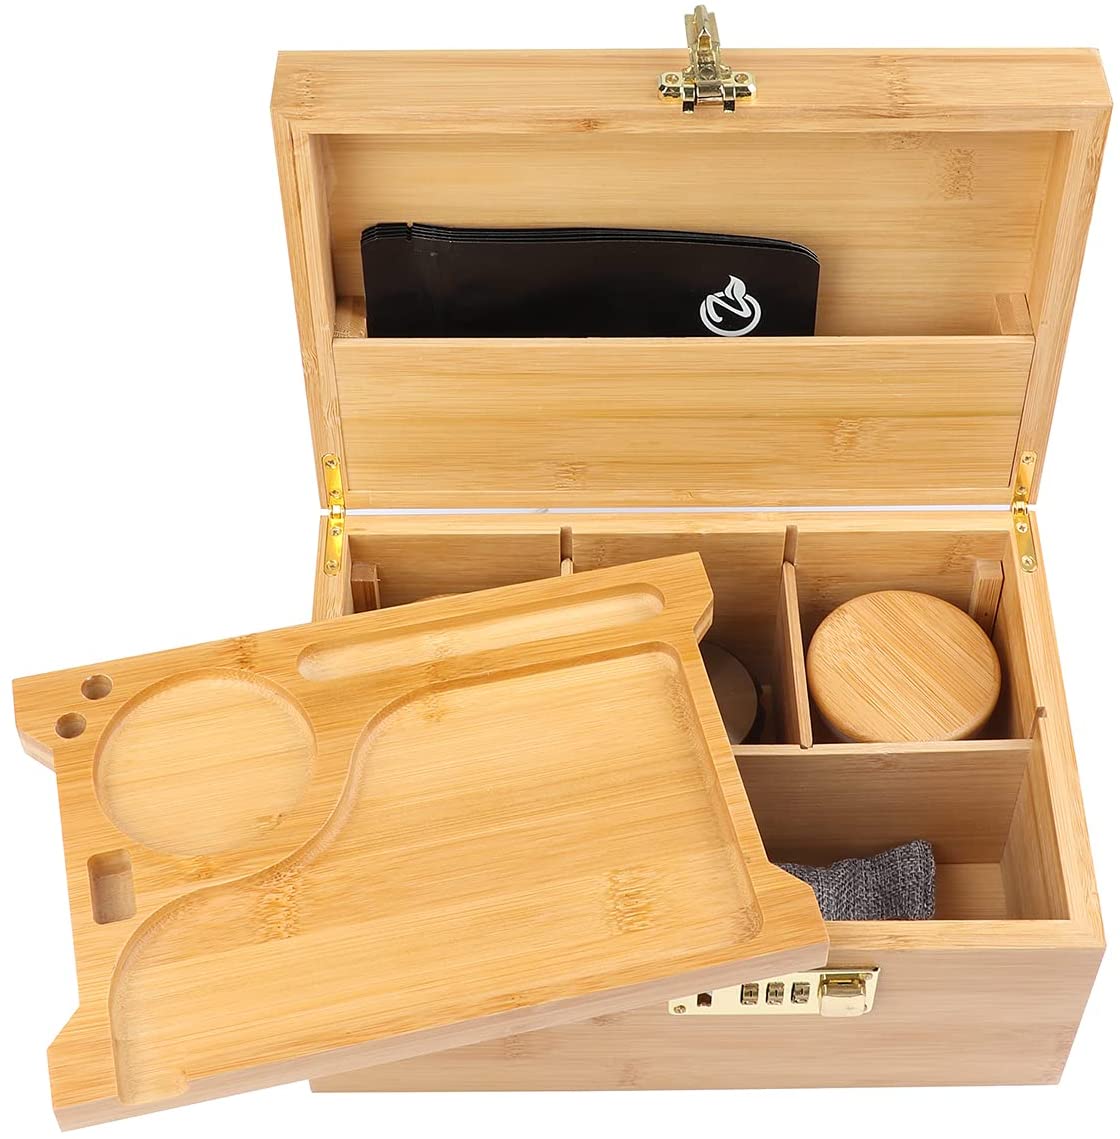 Tray Storage Tube & More Grinder Wooden Bamboo Stash Box Combo Kit with Lock 